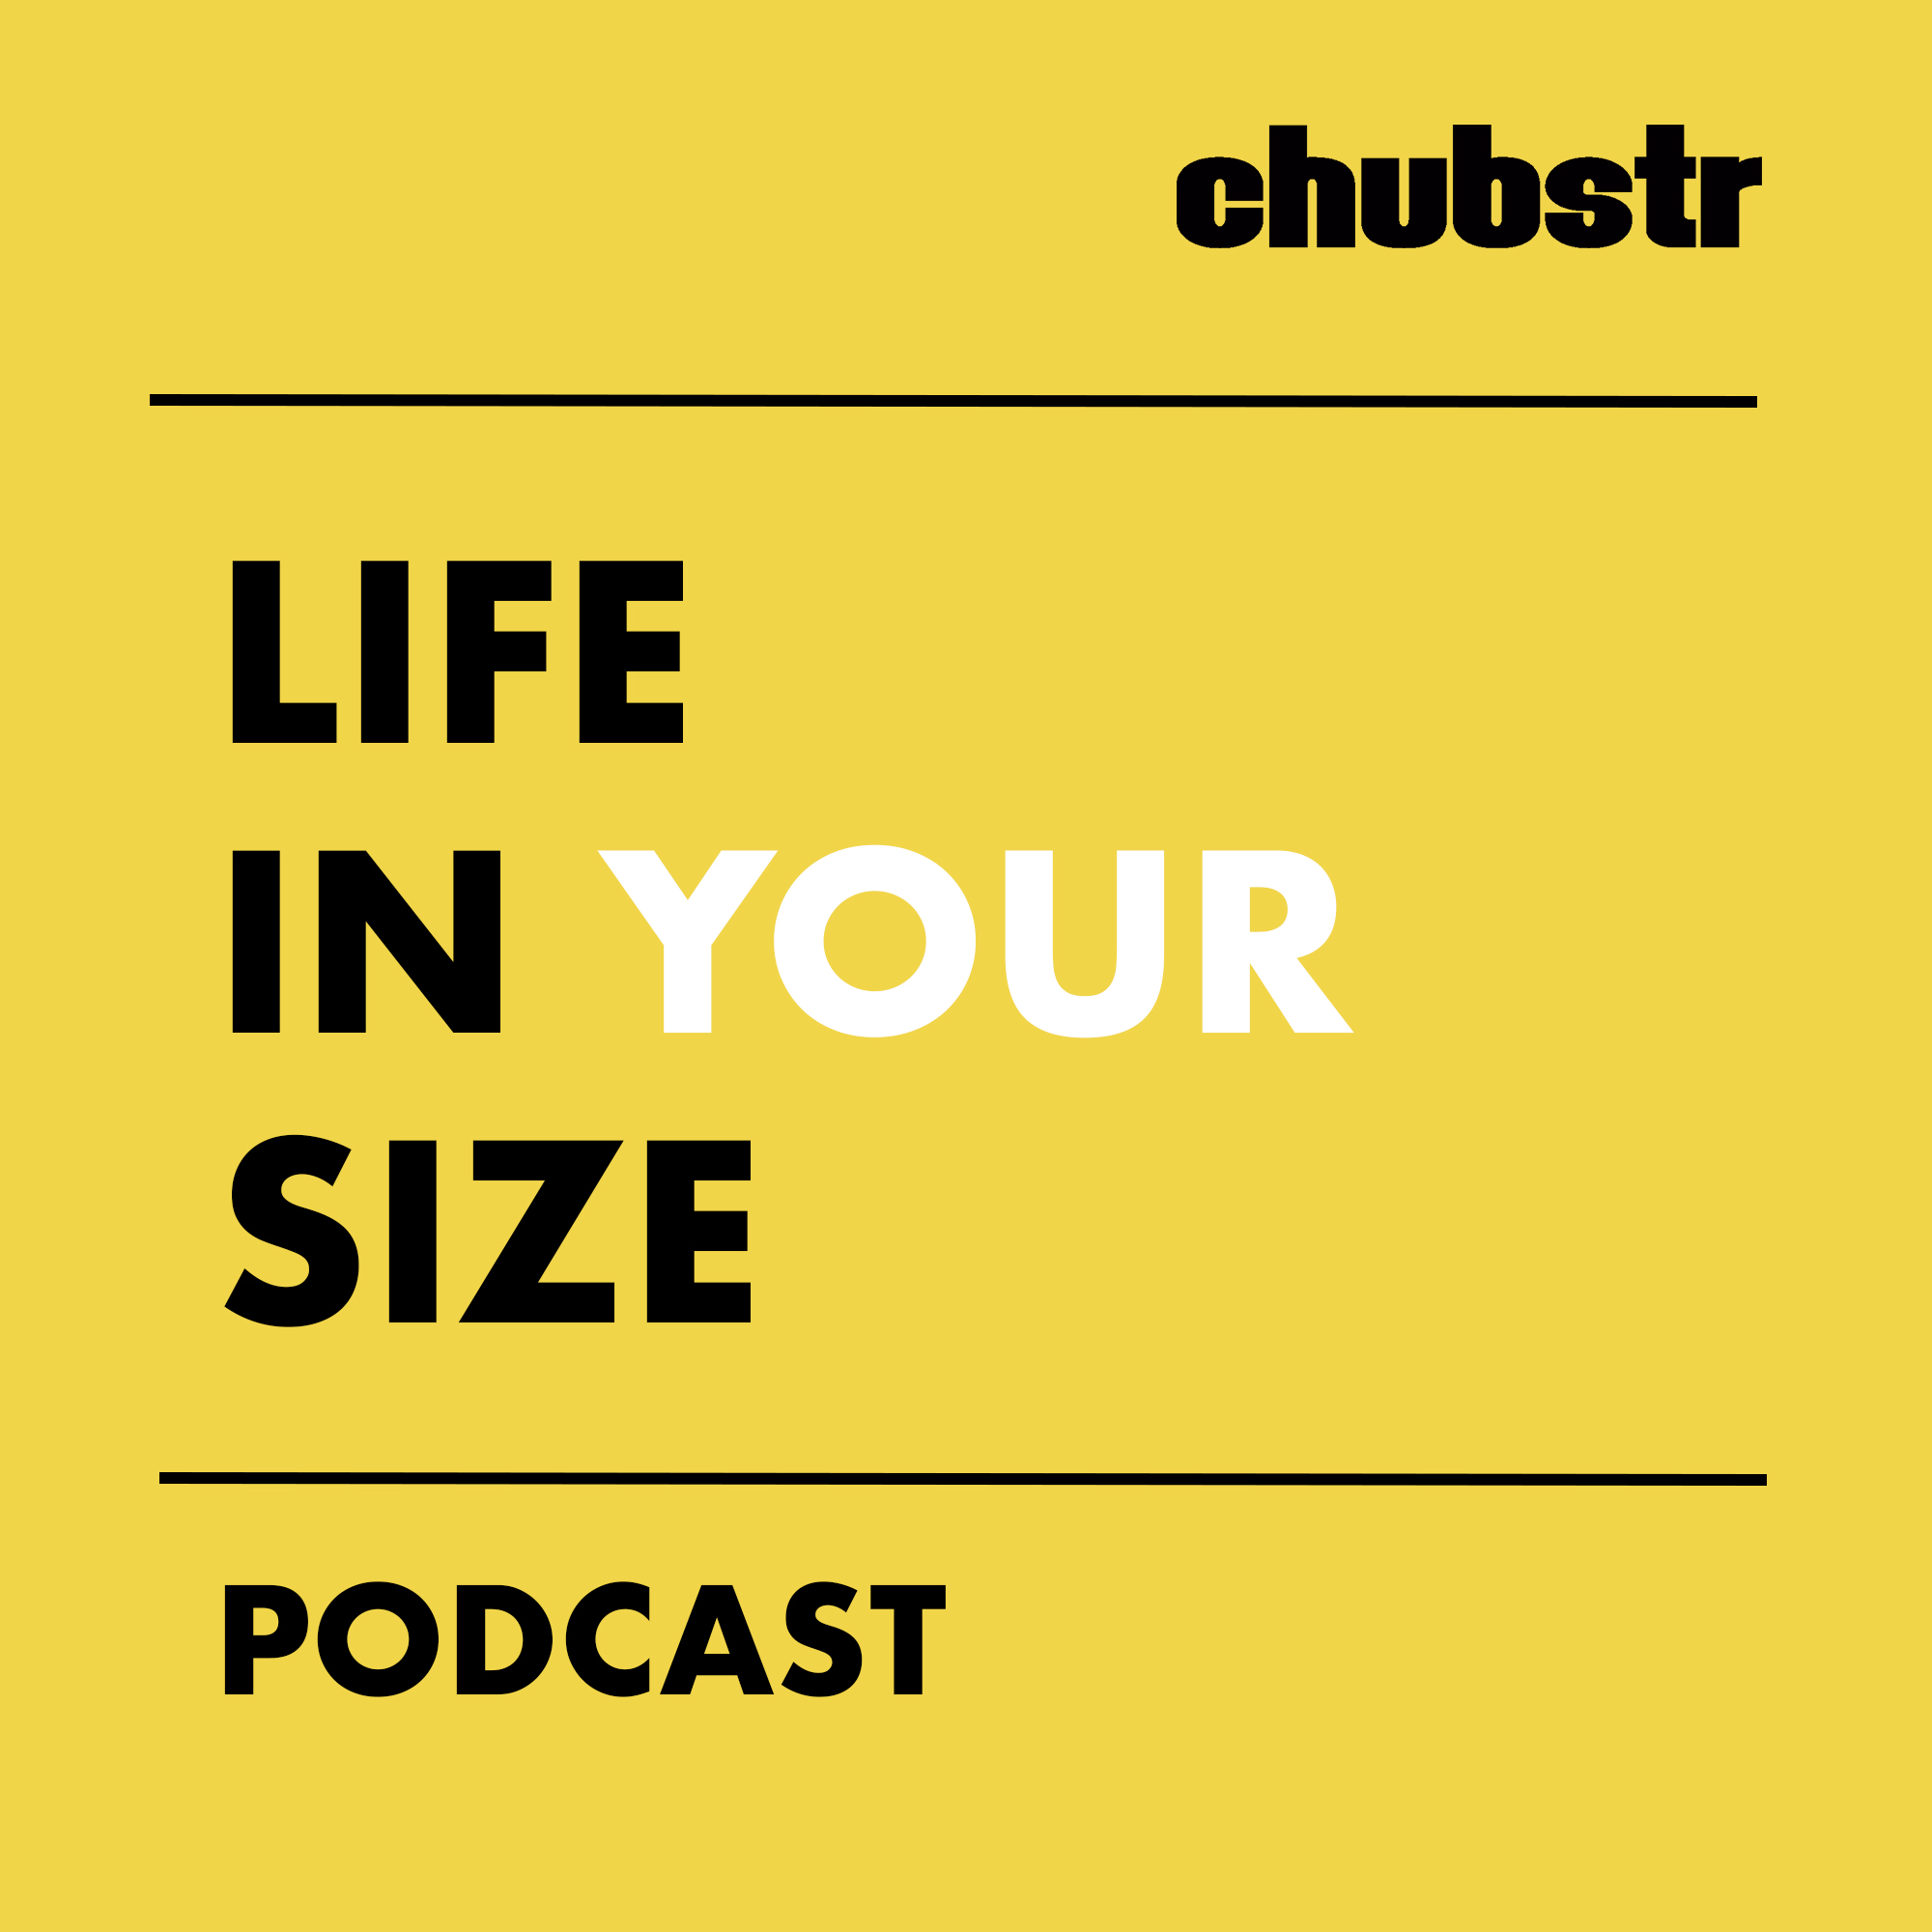 Life in Your Size Podcast from Chubstr